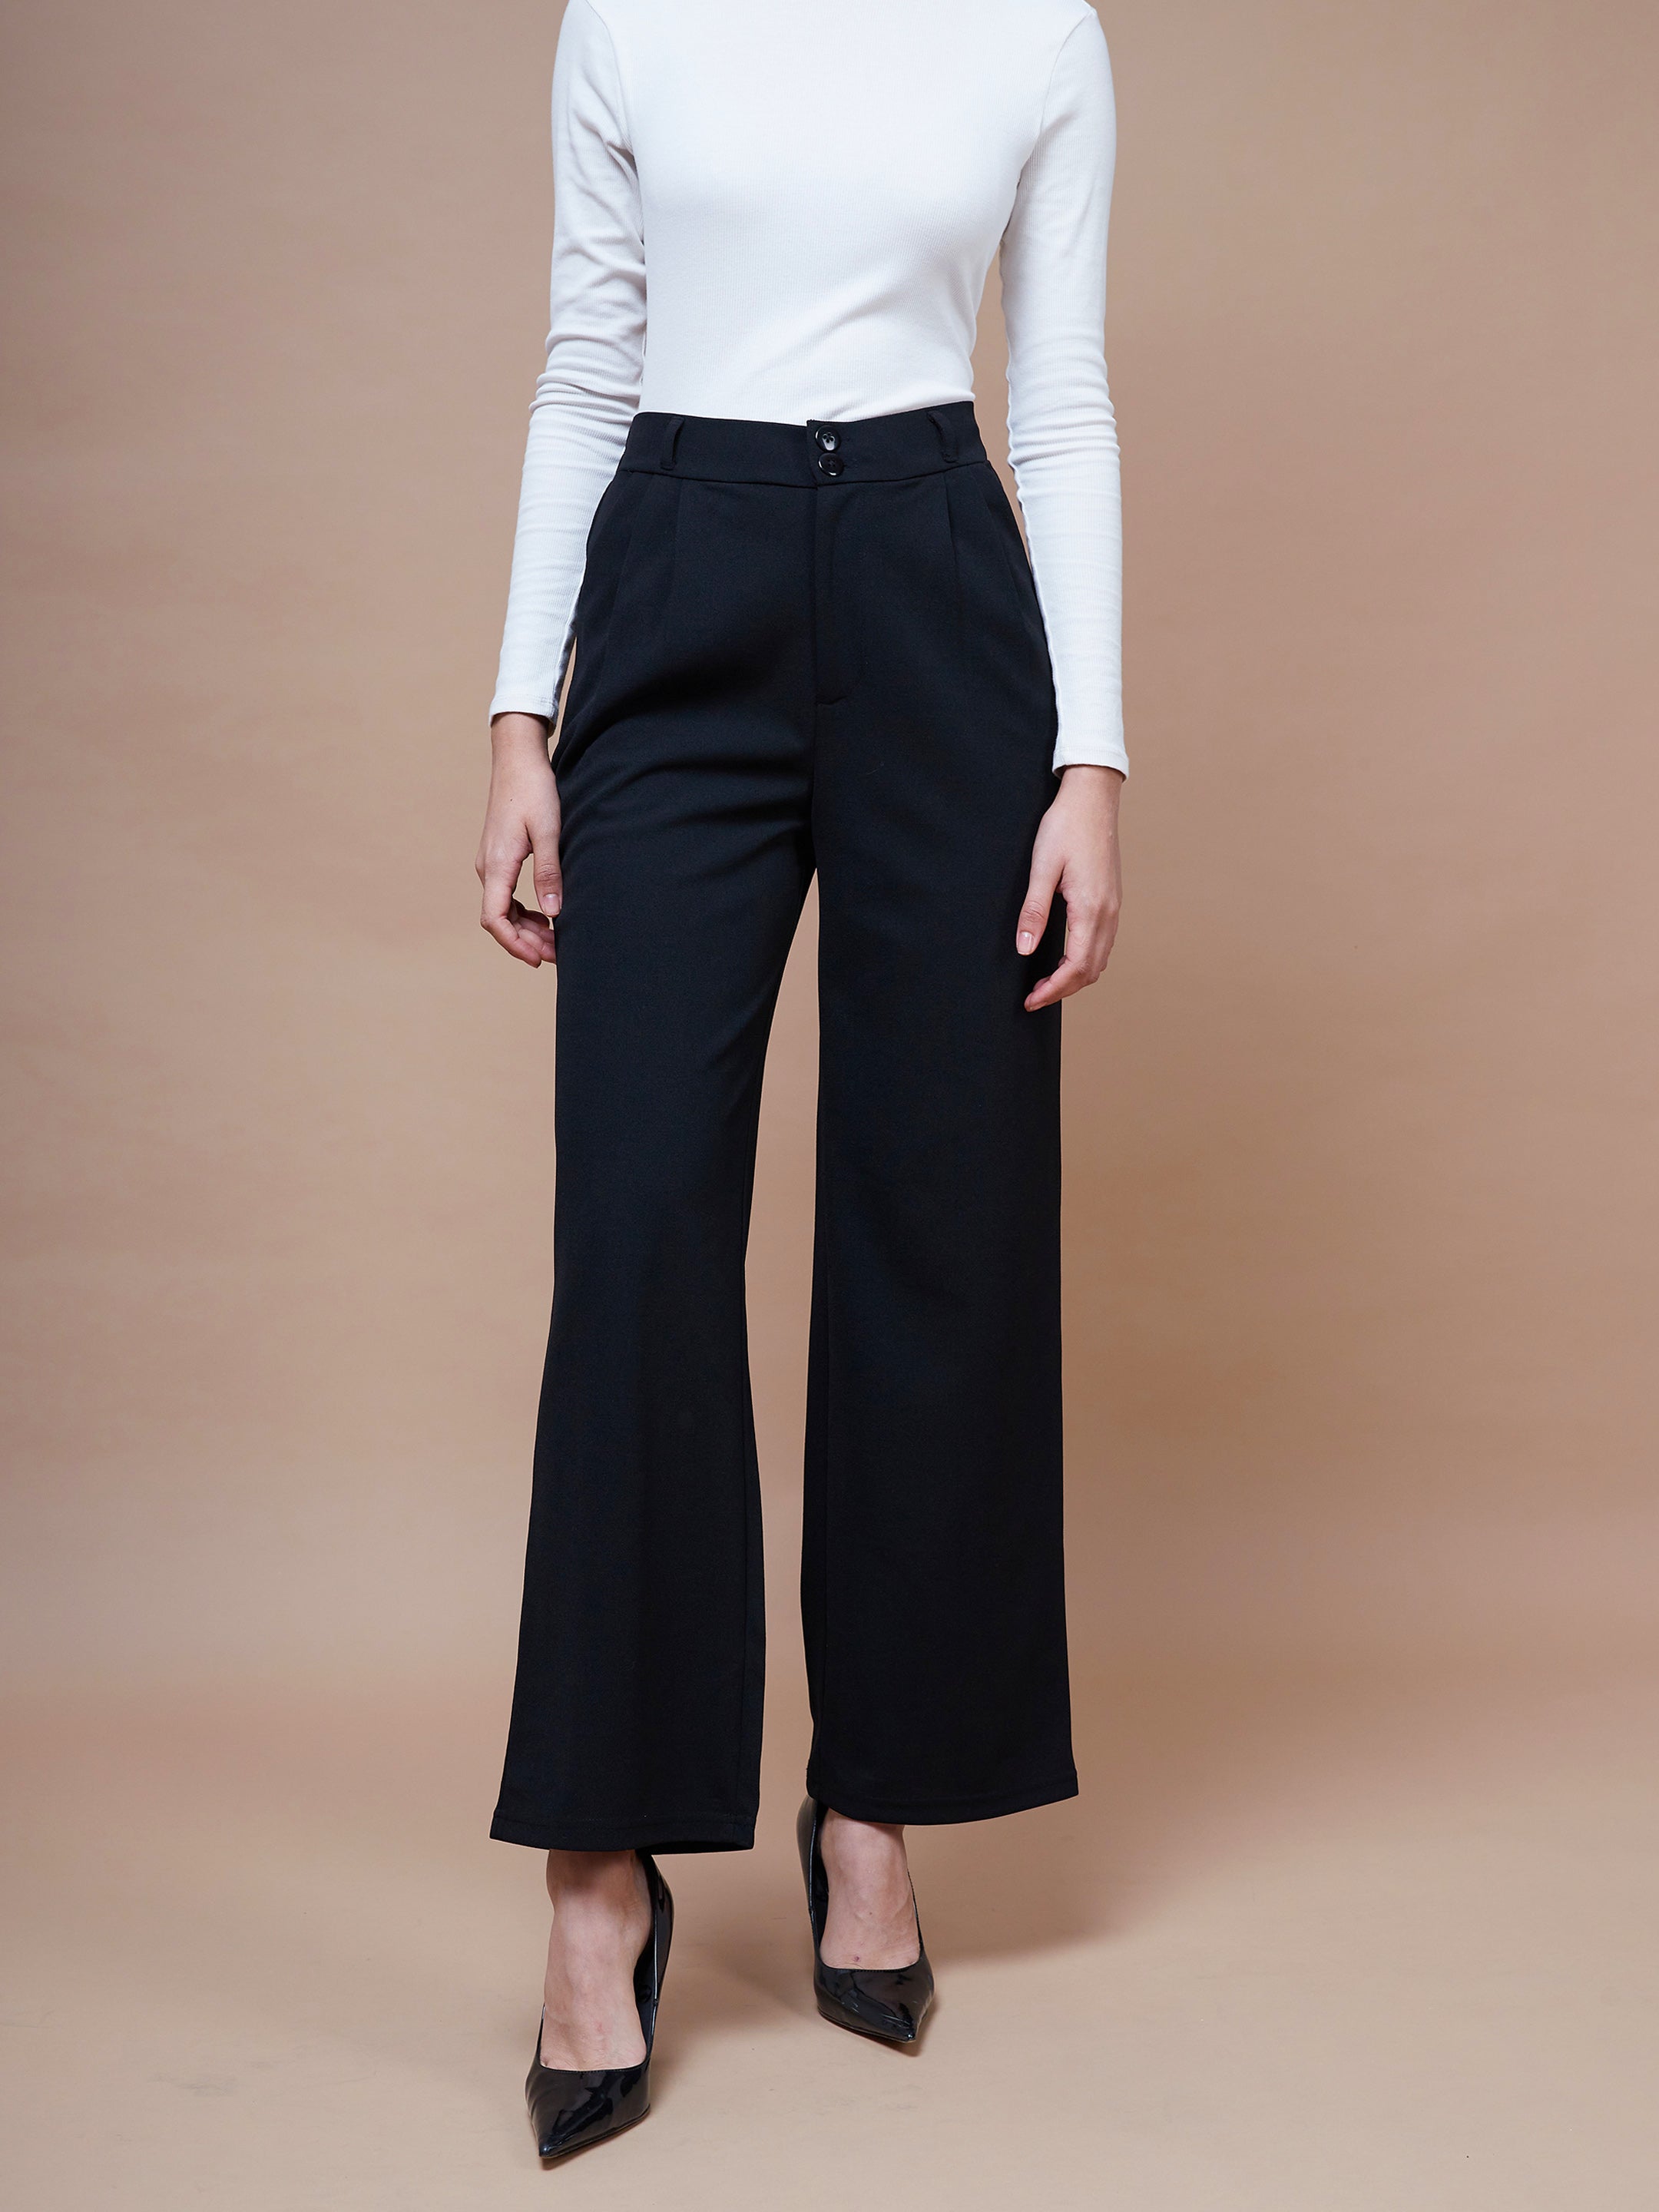 Buy Straight Pants for Women Online at the Best Price